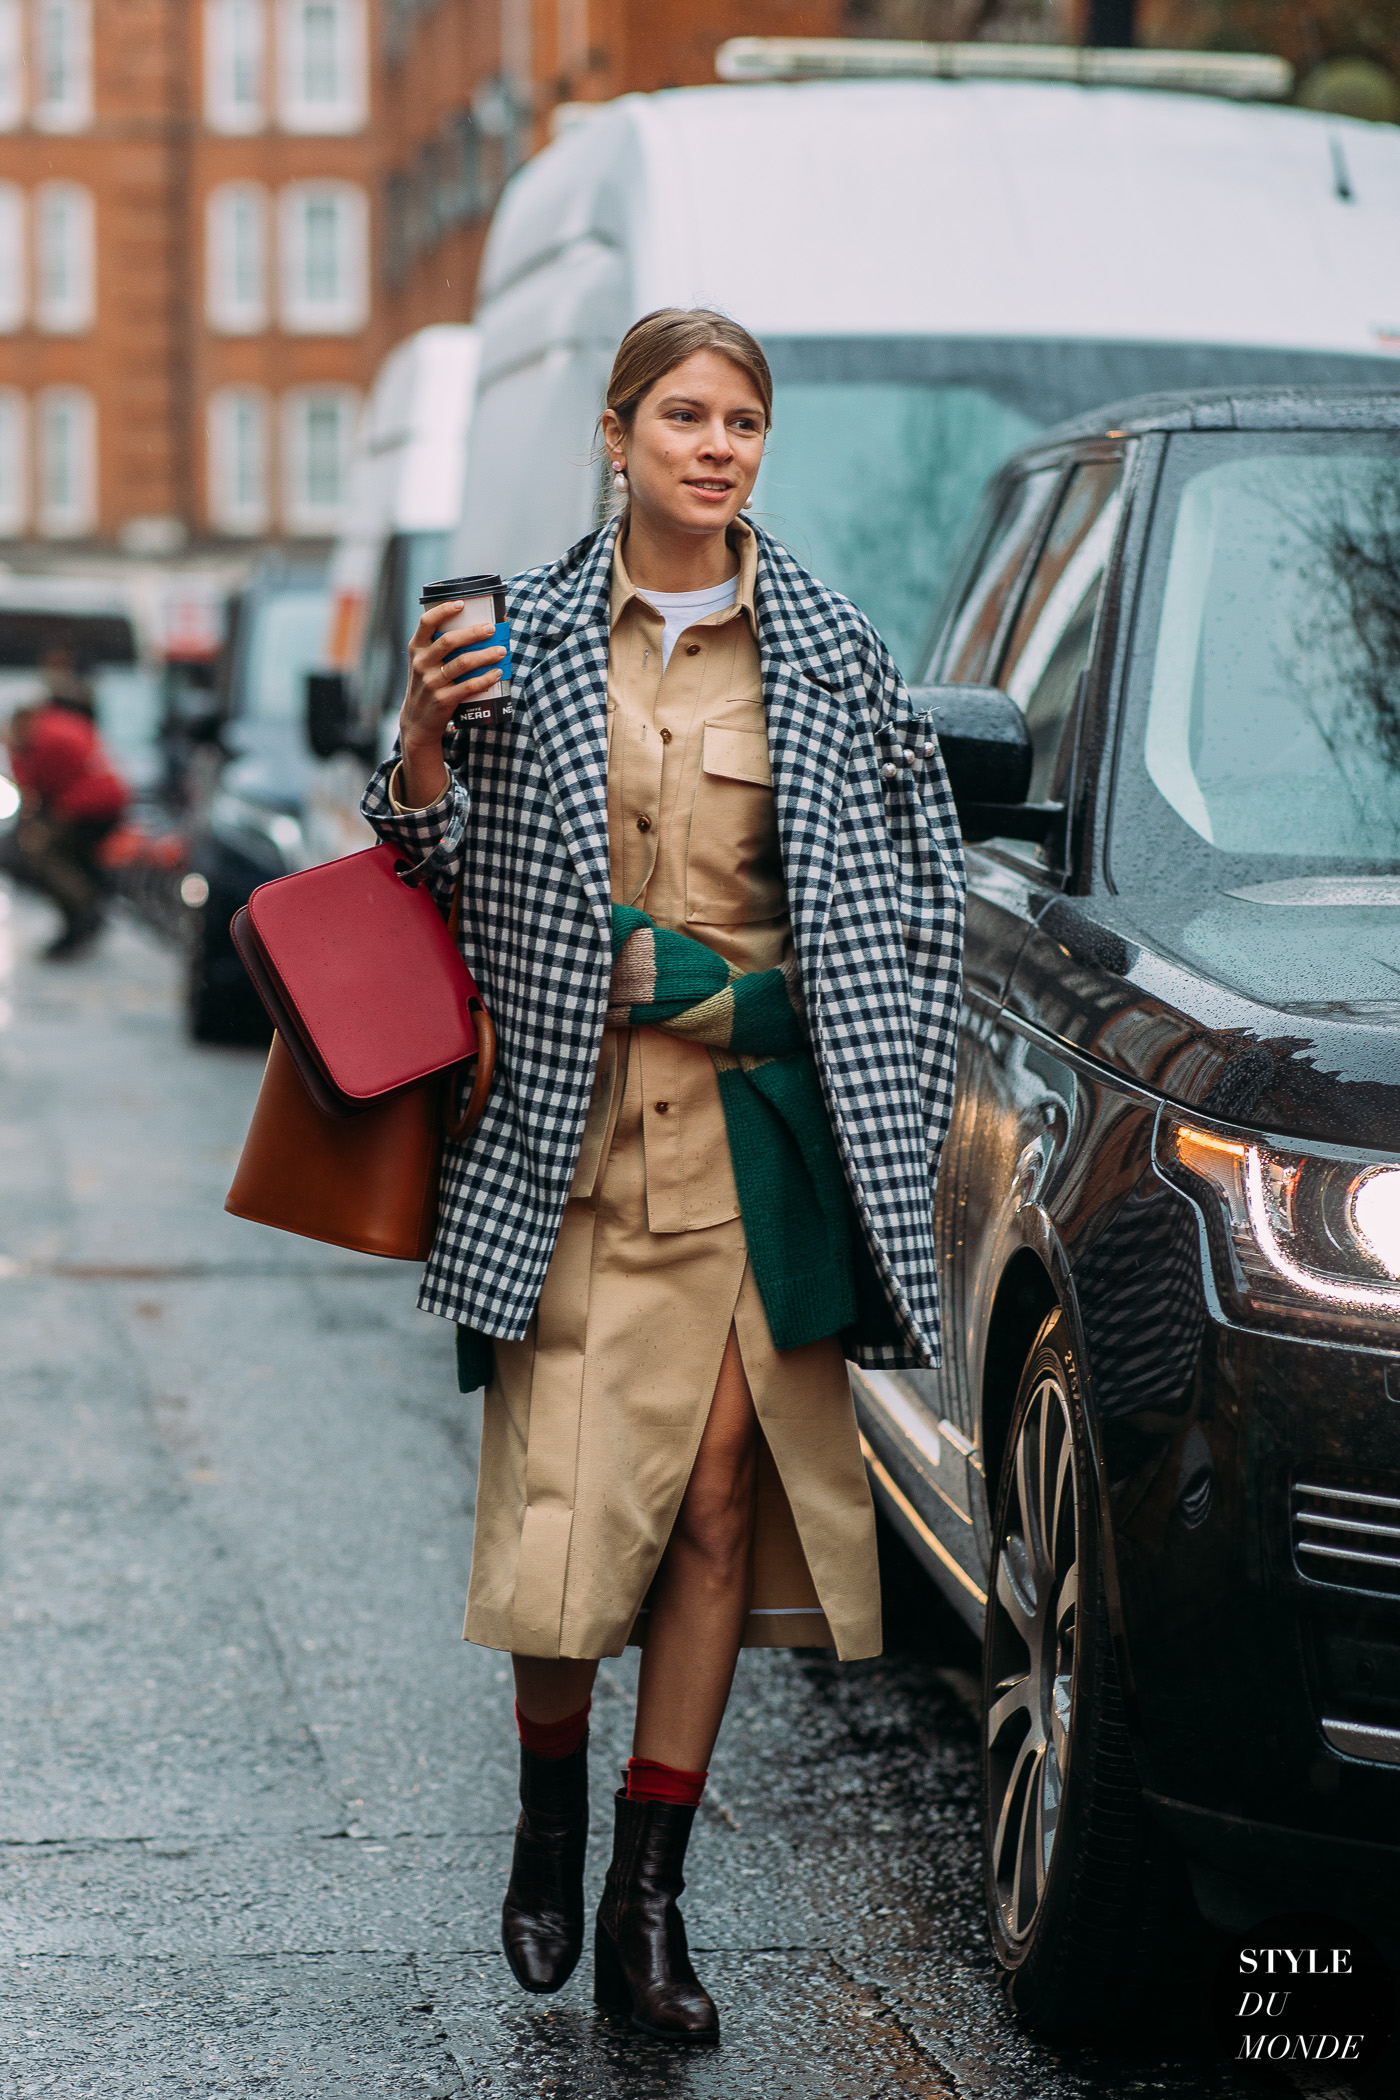 Monica Ainley by STYLEDUMONDE Street Style Fashion Photography FW18 20180219_48A4736